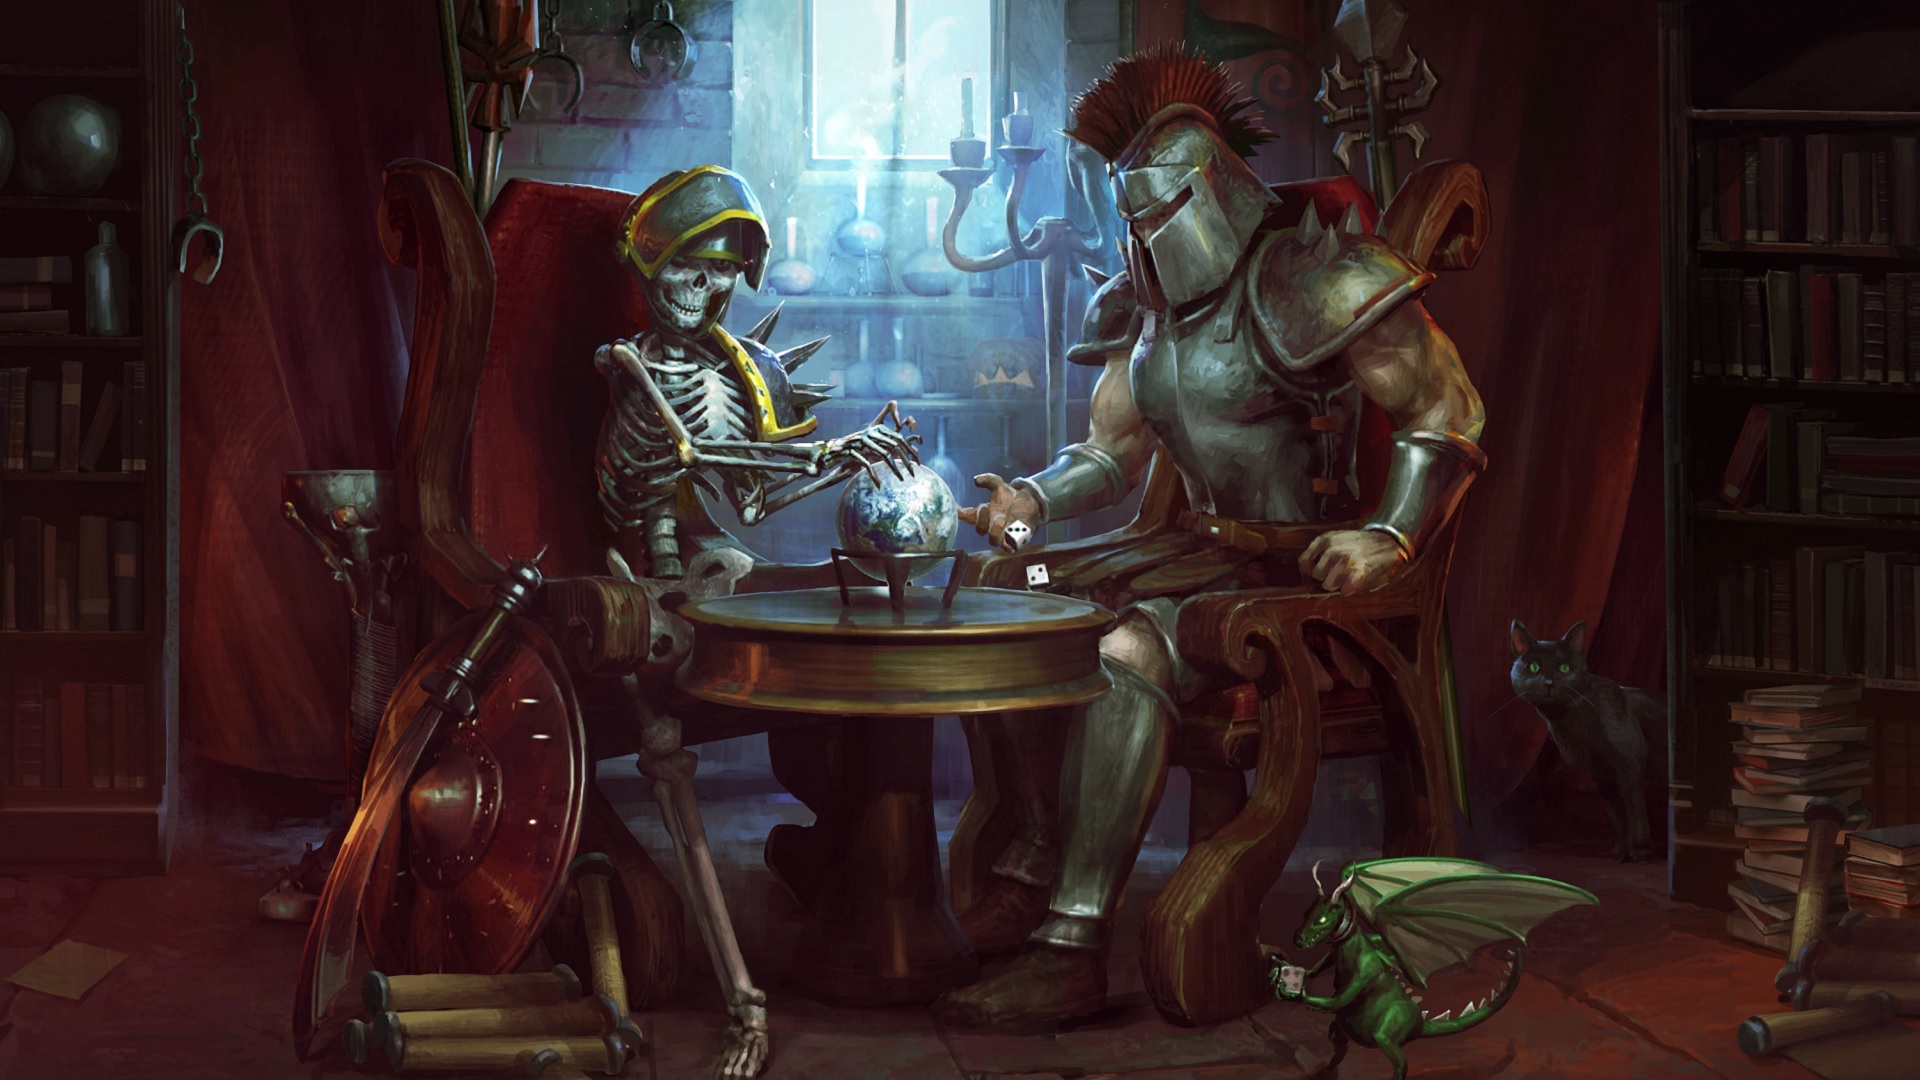 Best free PC games: Runescape. Image shows a knight and a skeleton at a table together. The skeleton is alive.